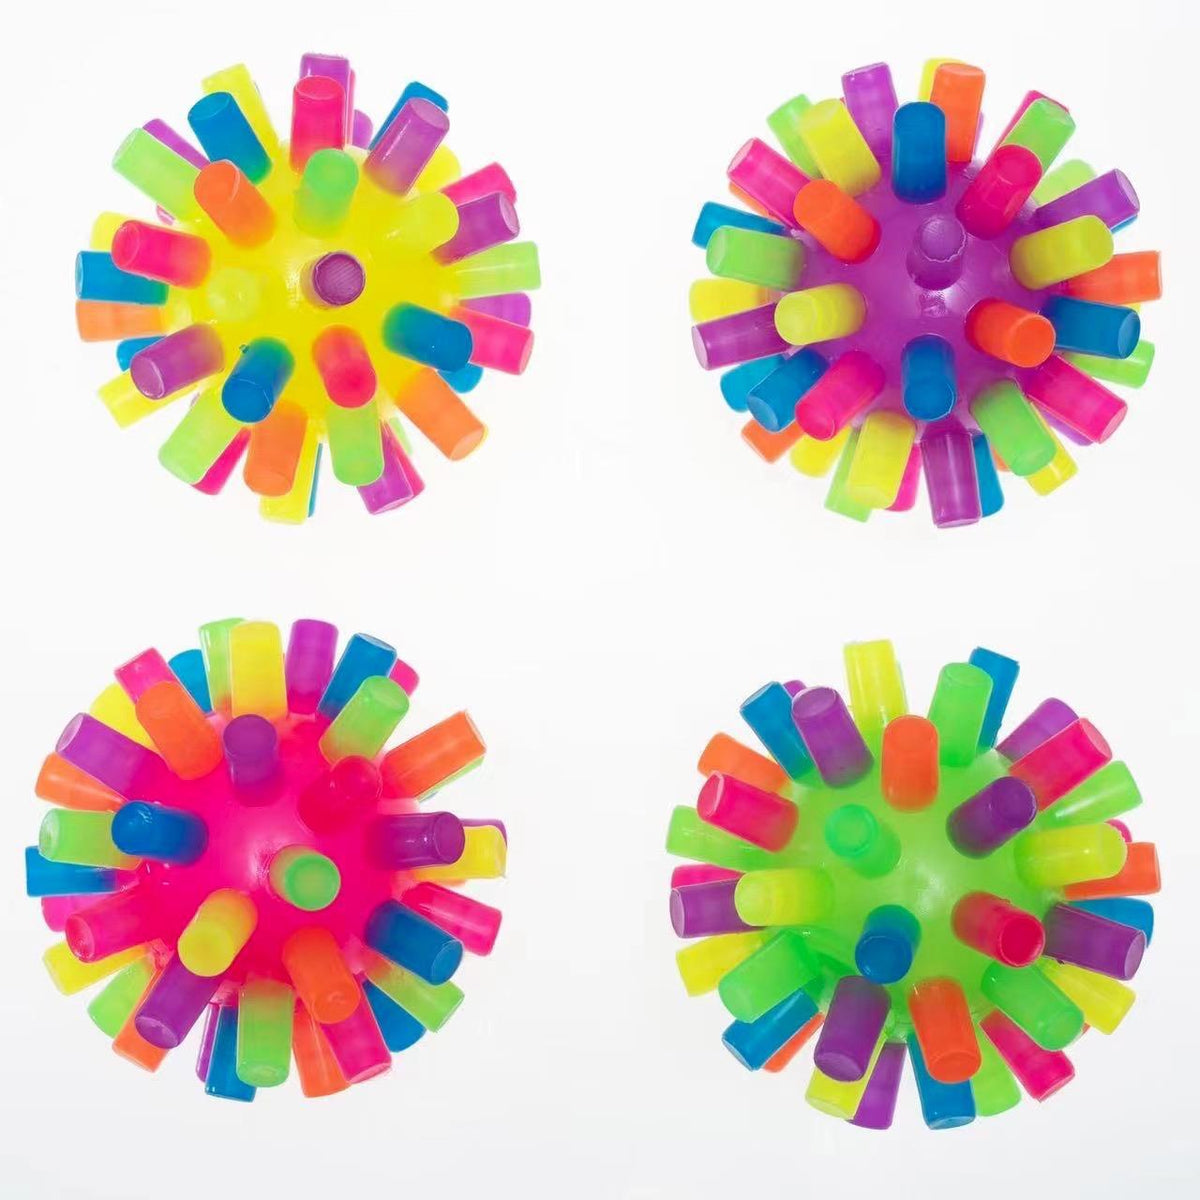 Cupcakes & Cartwheels Pop of Color Extra Large Light Up Spiky Bouncing Ball